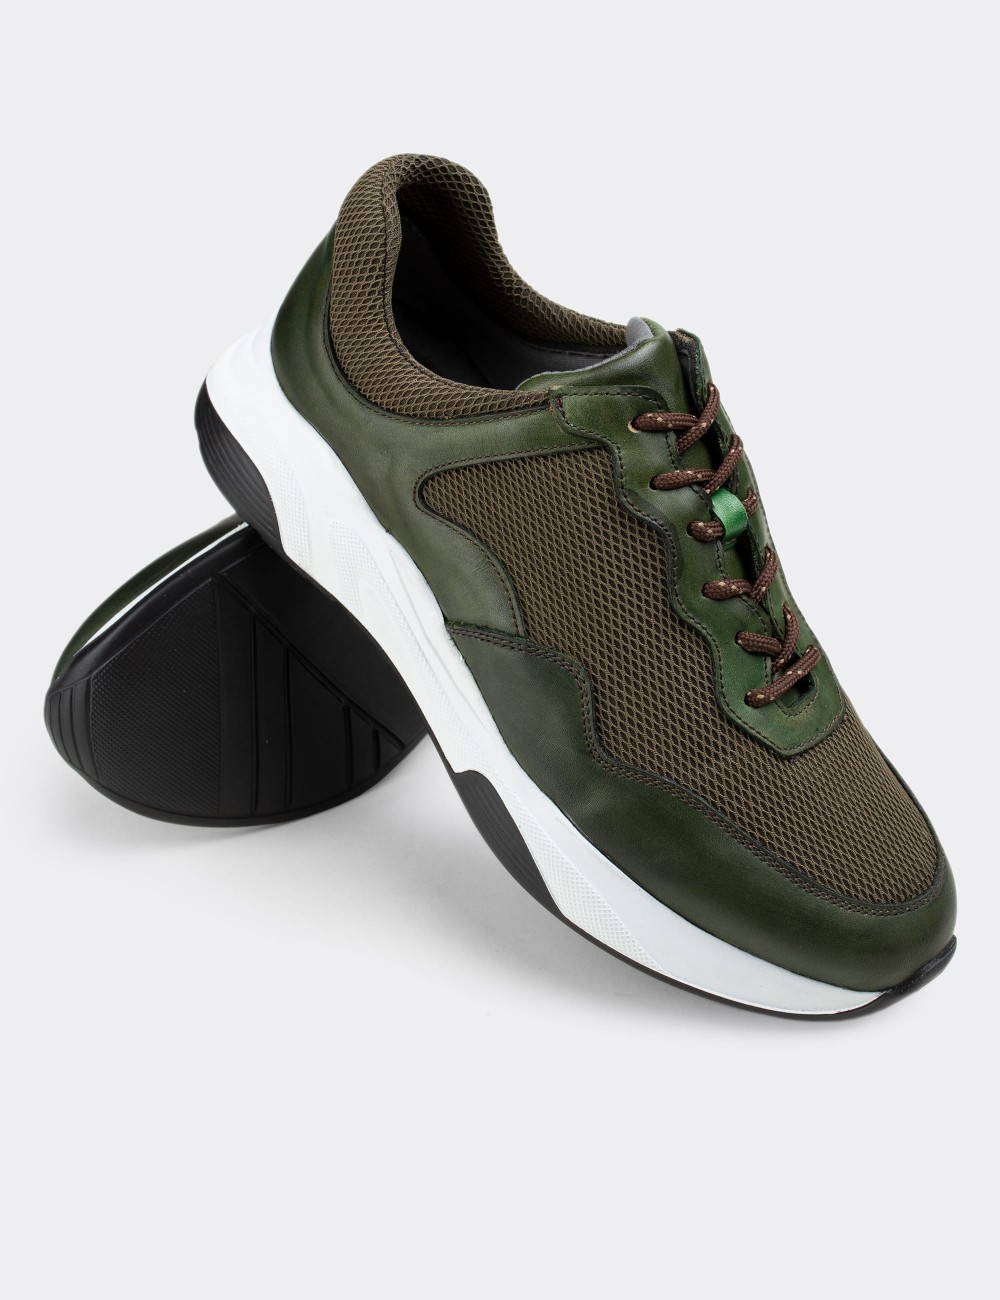 Green Suede Leather Sneakers - 01725MYSLE02